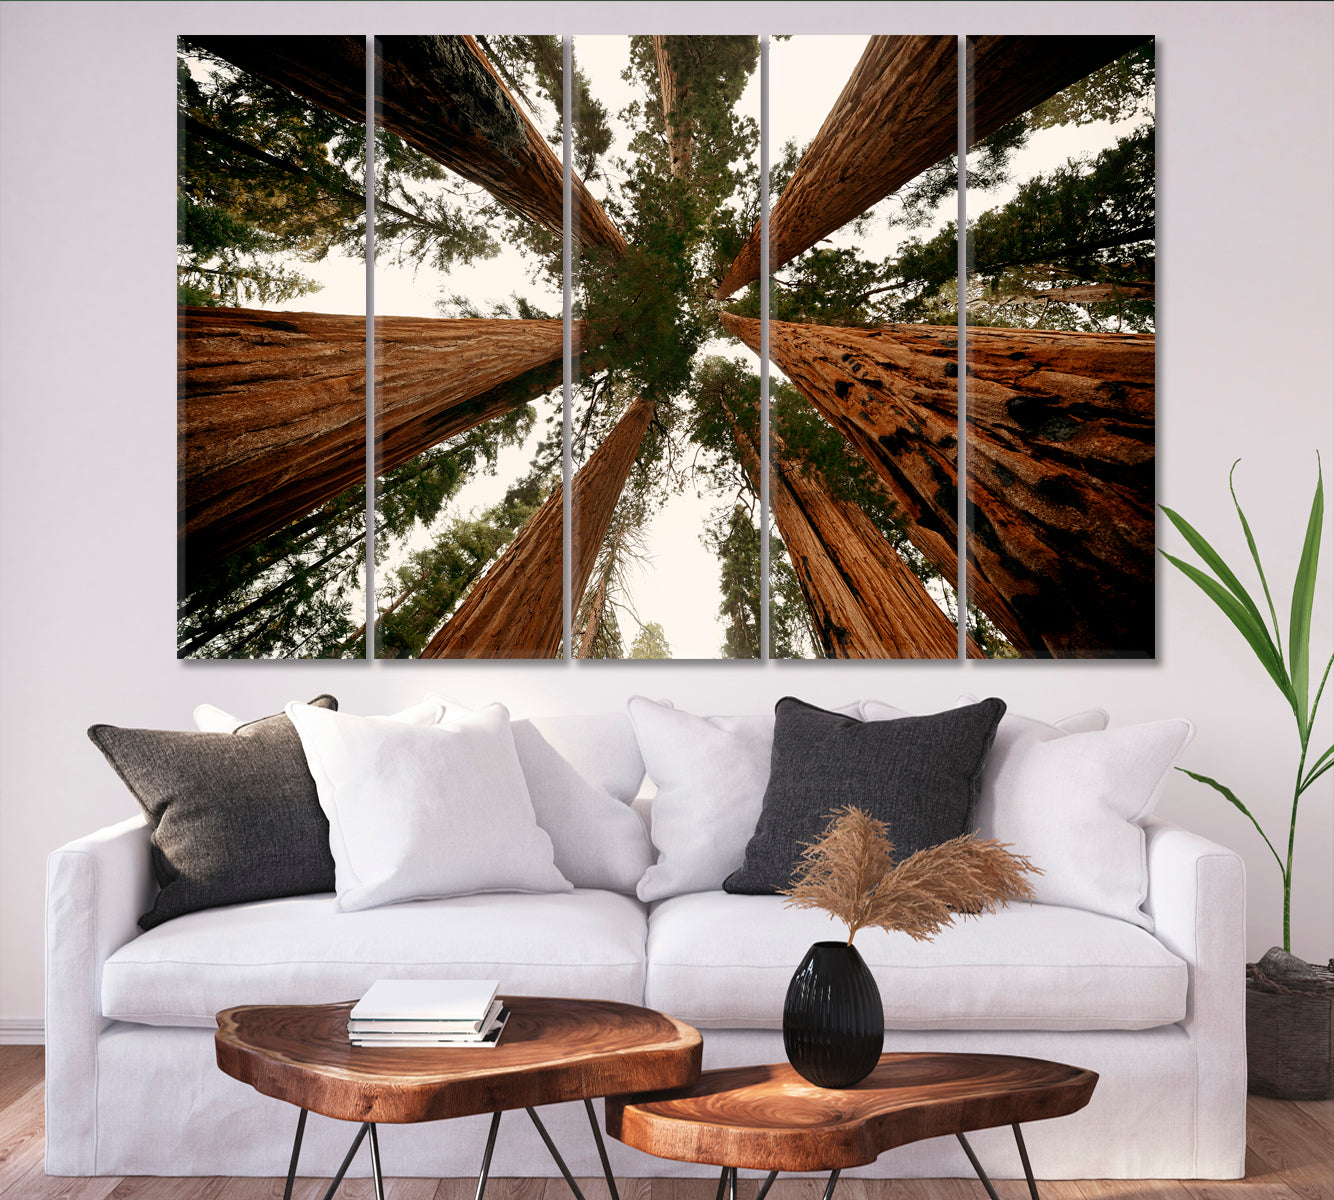 TREES Sequoia and Kings National Park Nature Scenery Nature Wall Canvas Print Artesty 5 panels 36" x 24" 